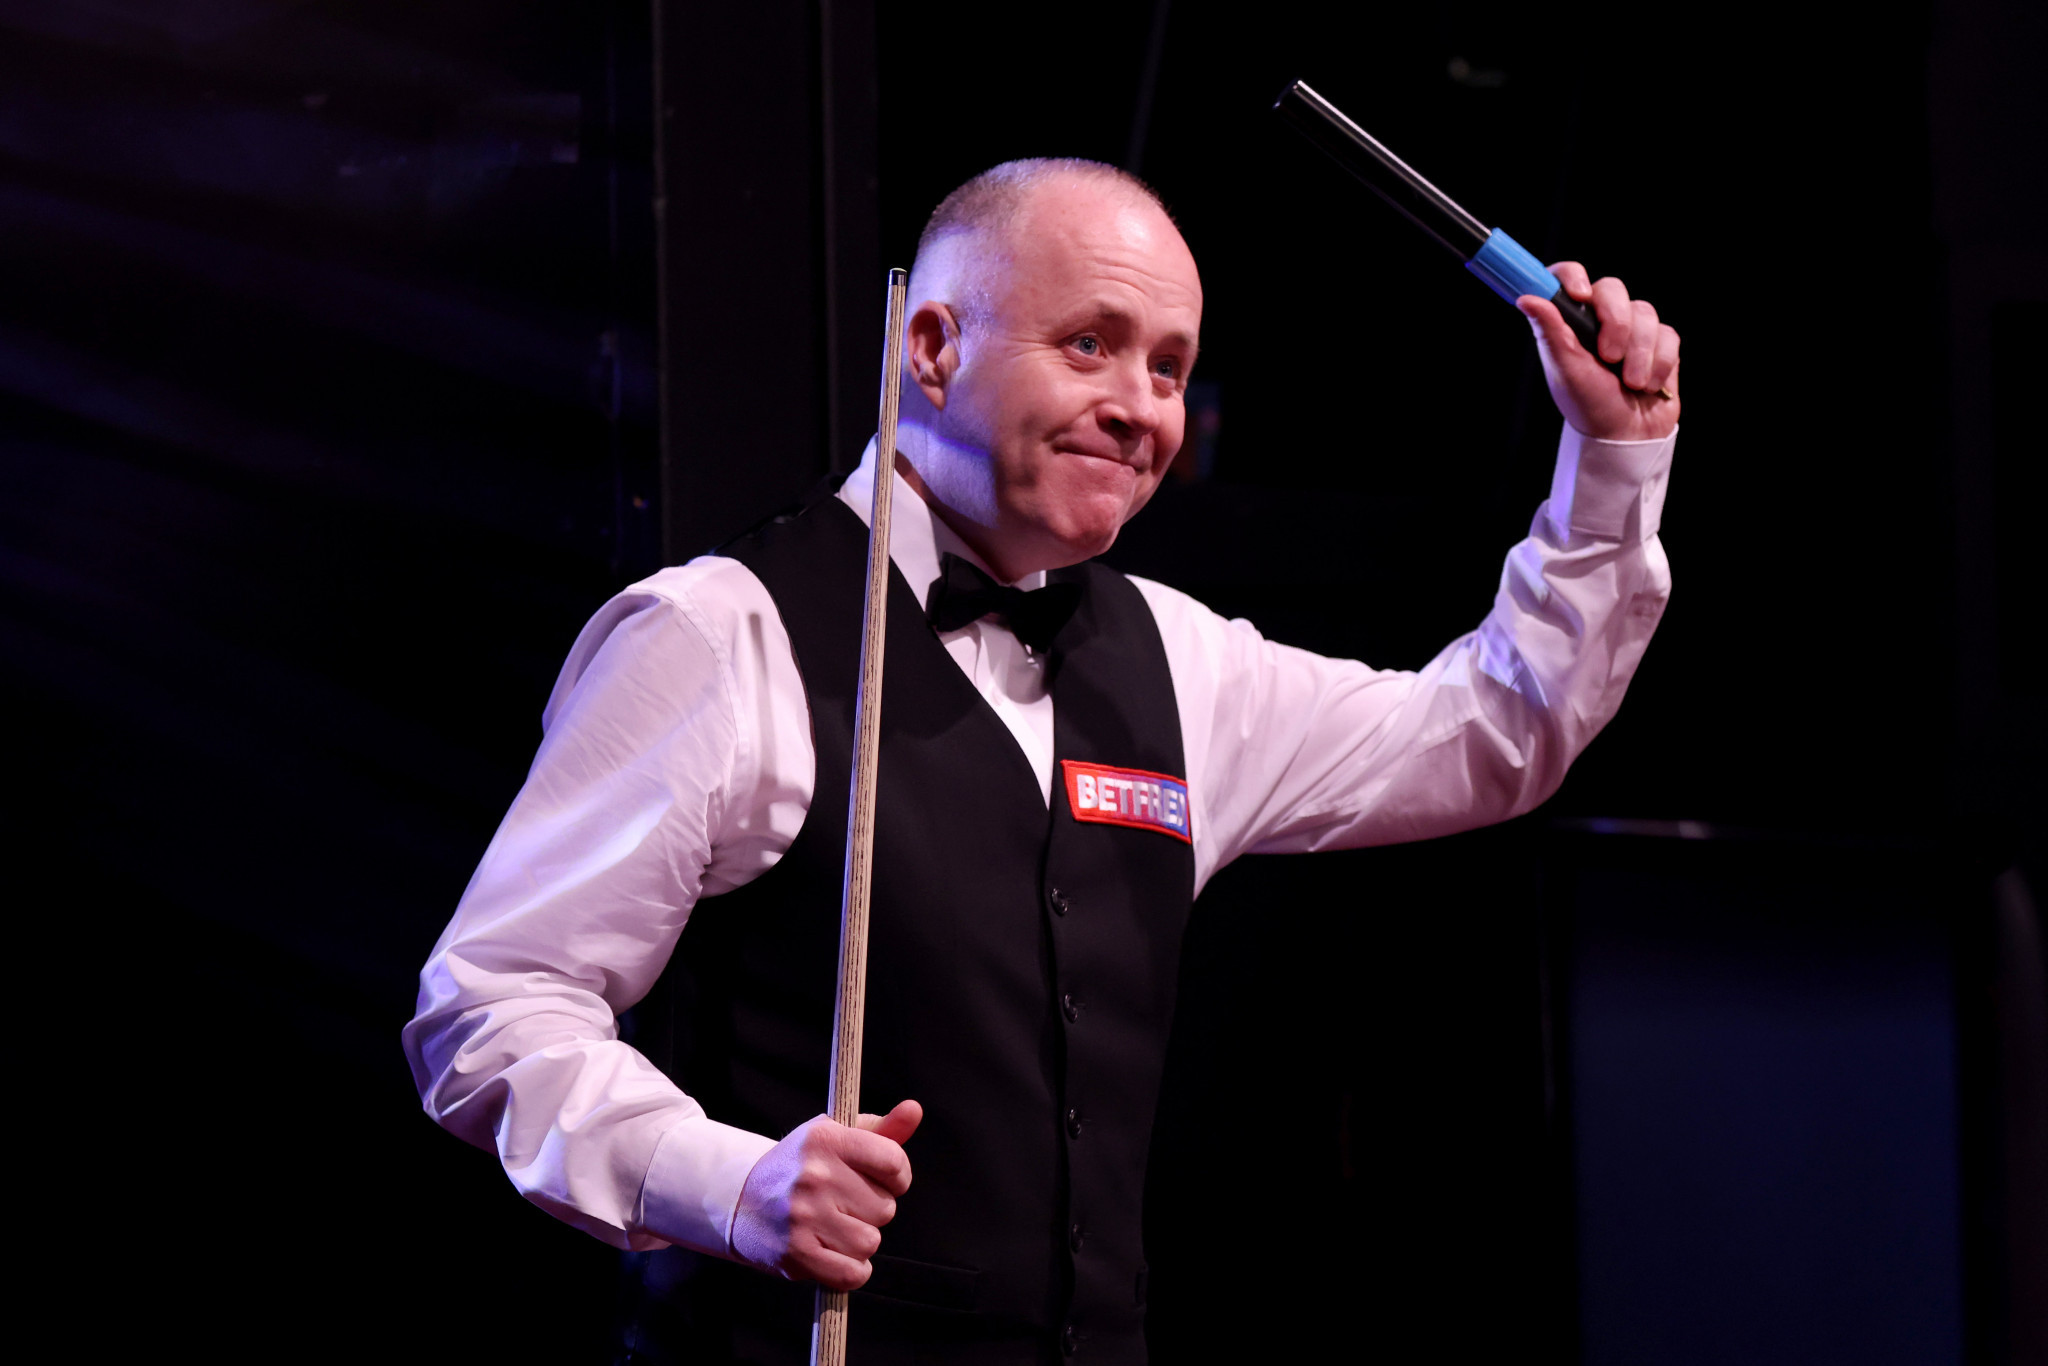 Four former world champions in line-up for World Snooker Championship semi-finals